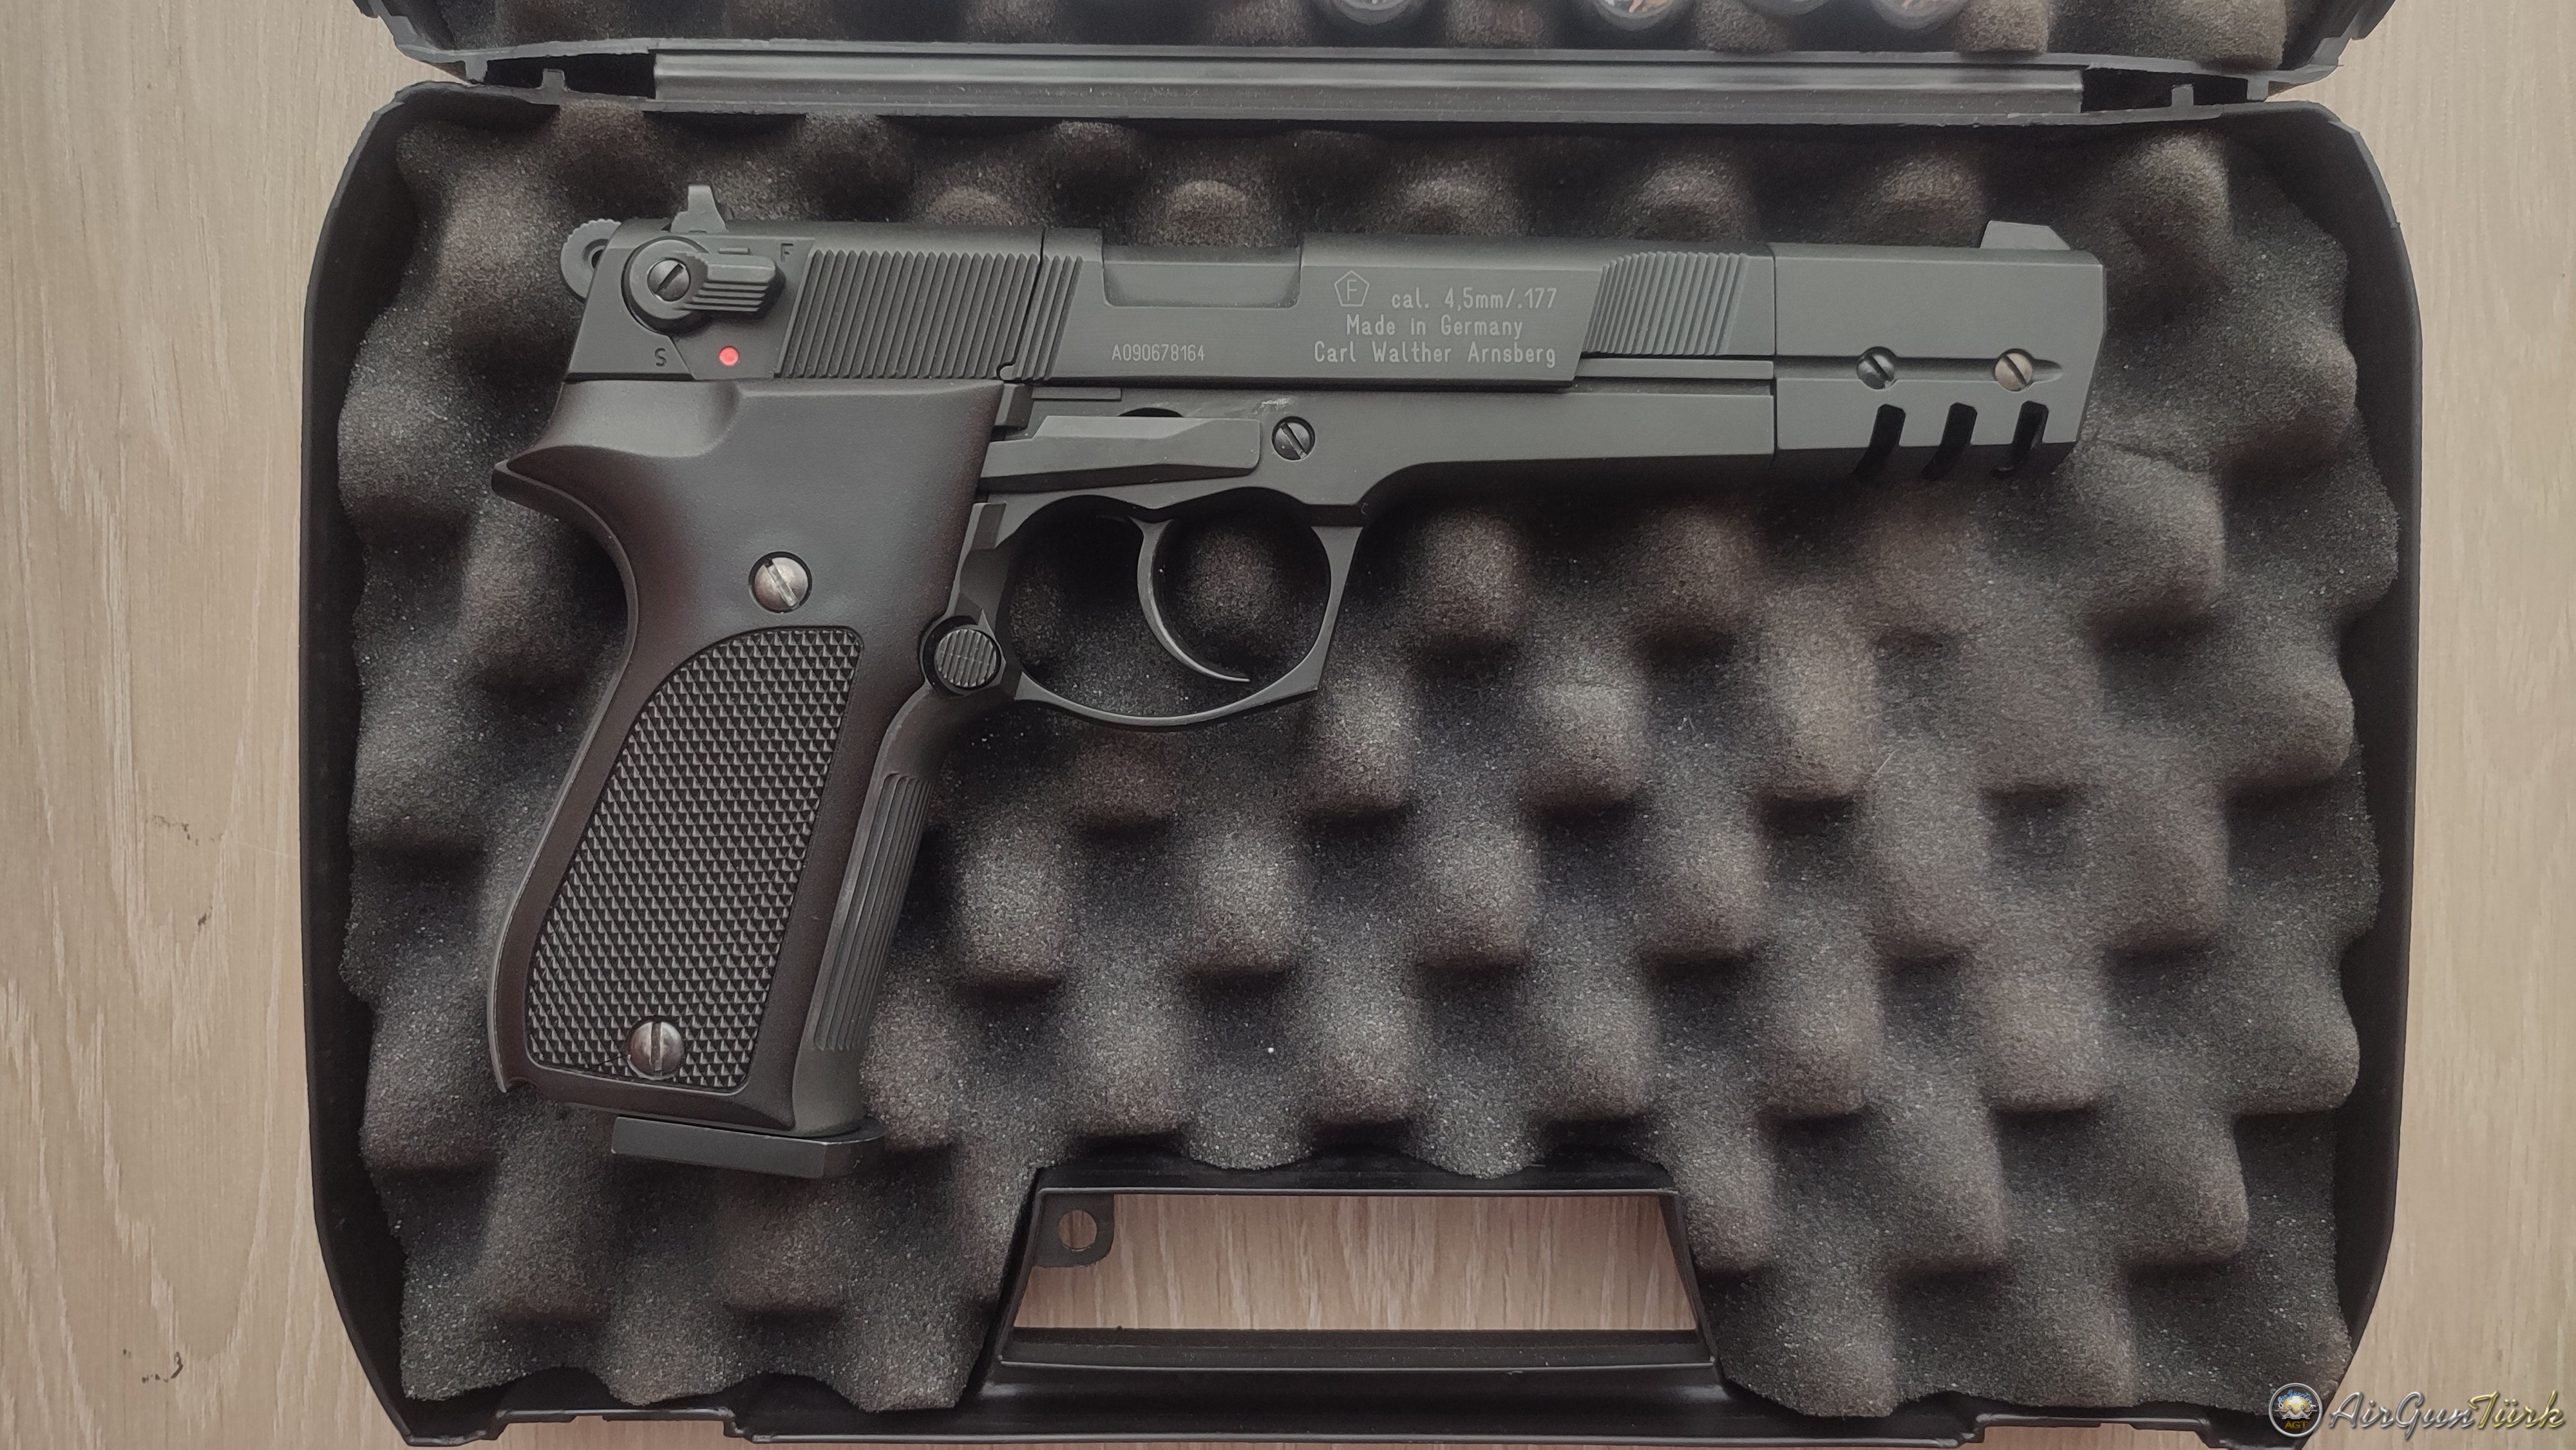 Umarex Walther CP88 Competition